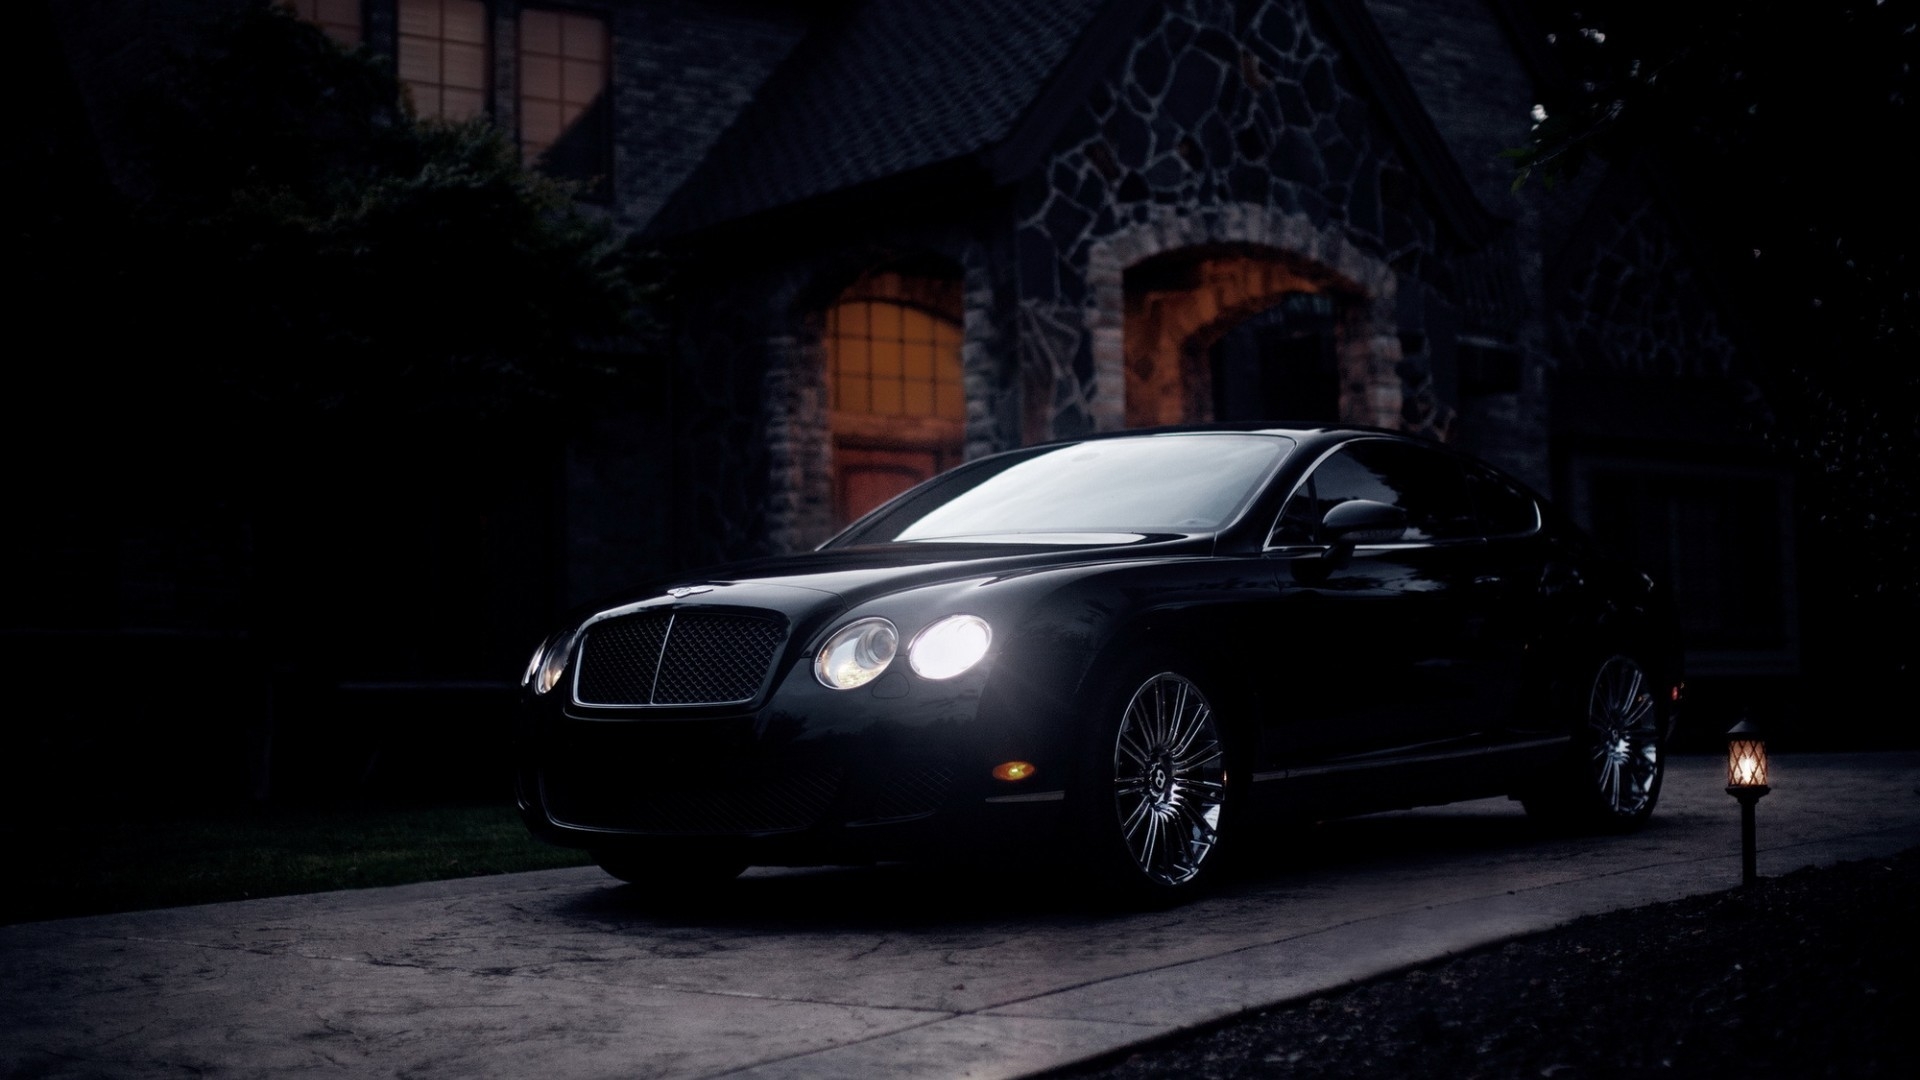 Black Bentley Continental GT for 1920 x 1080 HDTV 1080p resolution